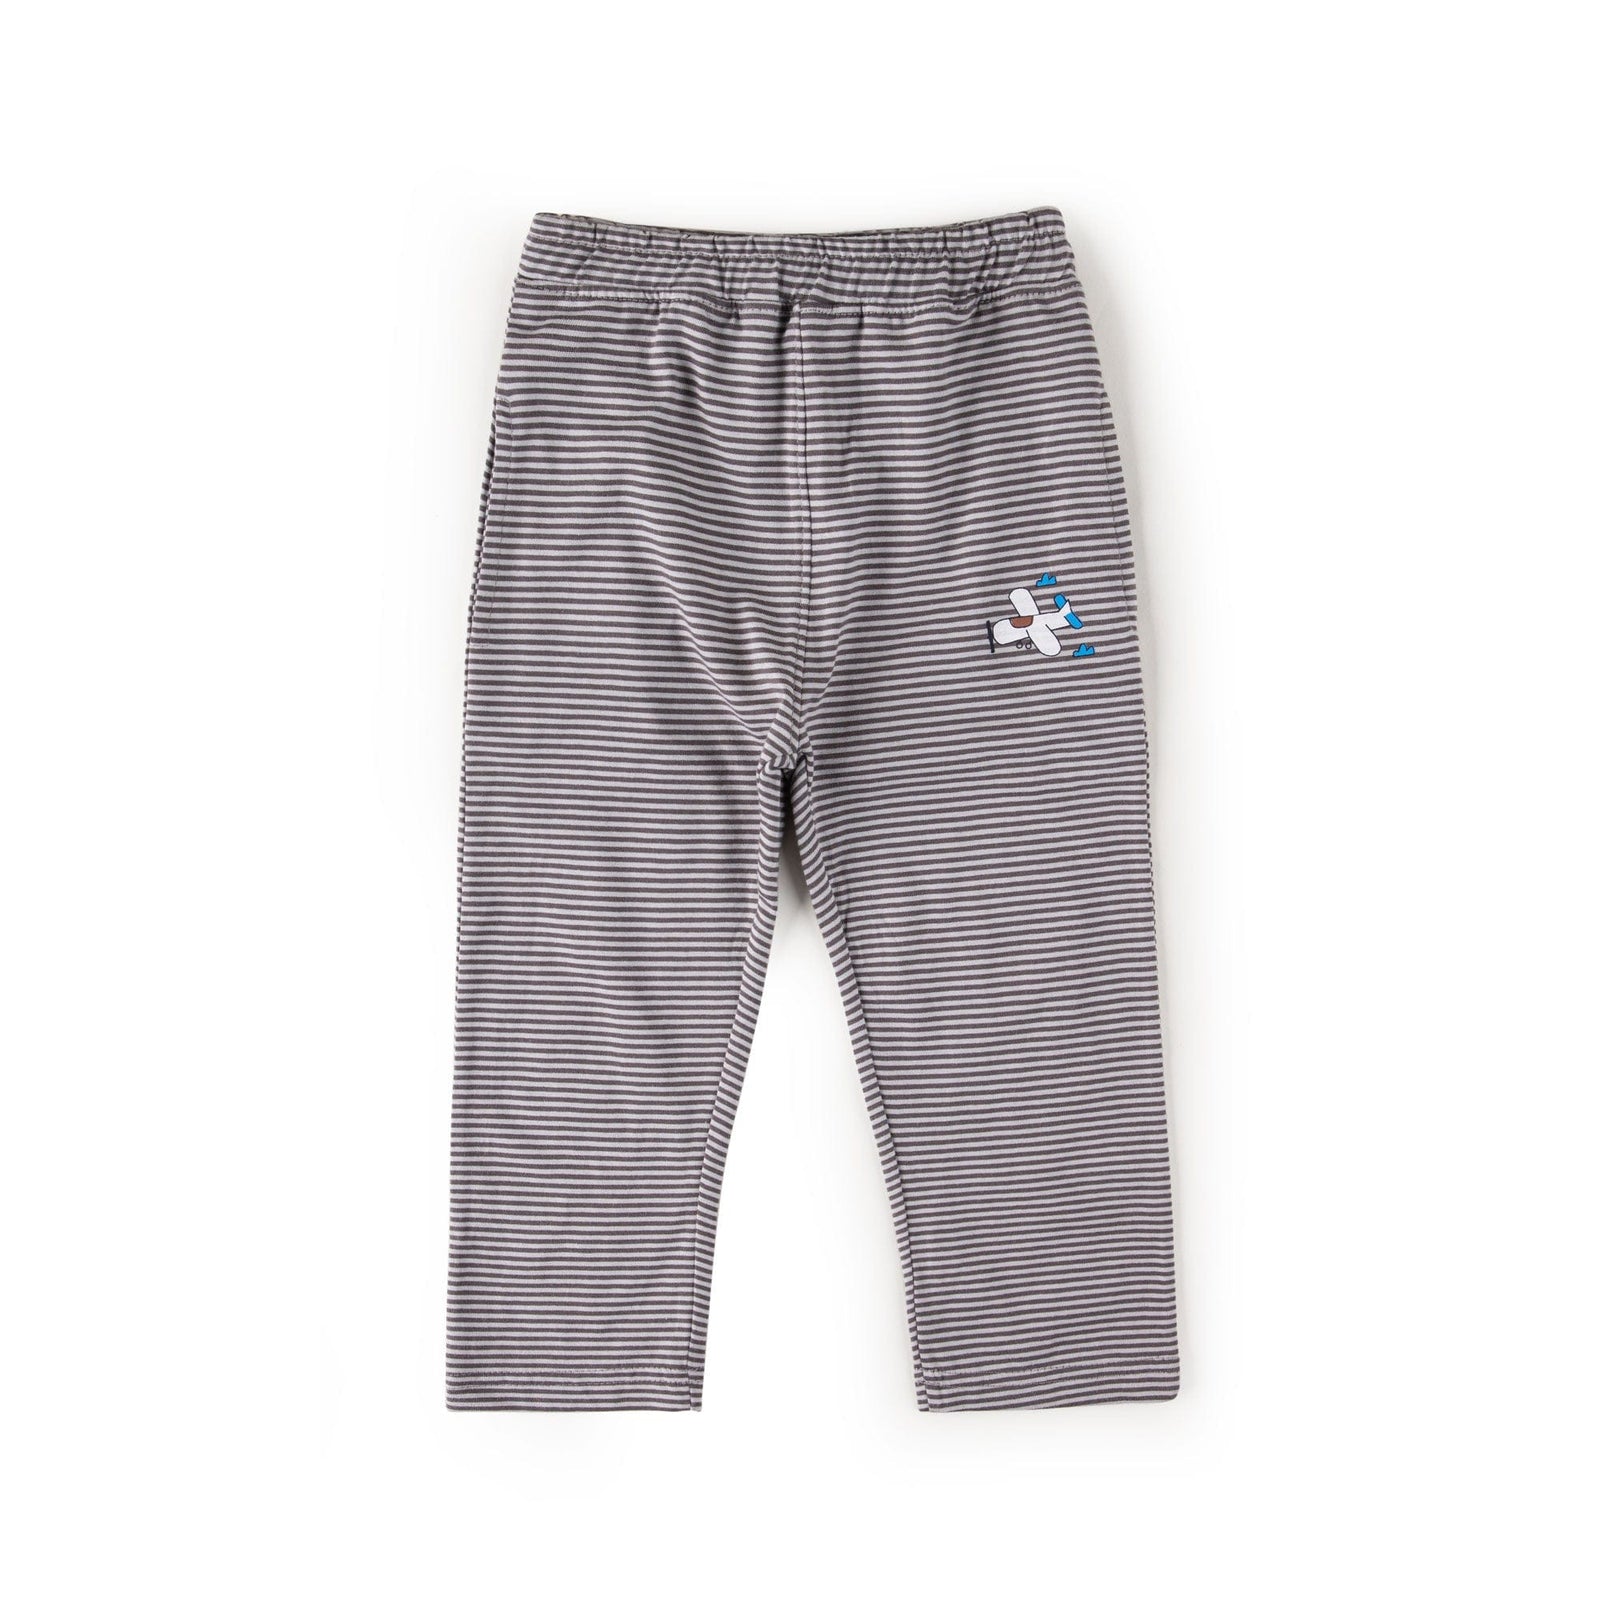 Stone Harbor Boy's Trouser Striper / 0-3 M BOY'S RELAXED FIT PRINTED TROUSER